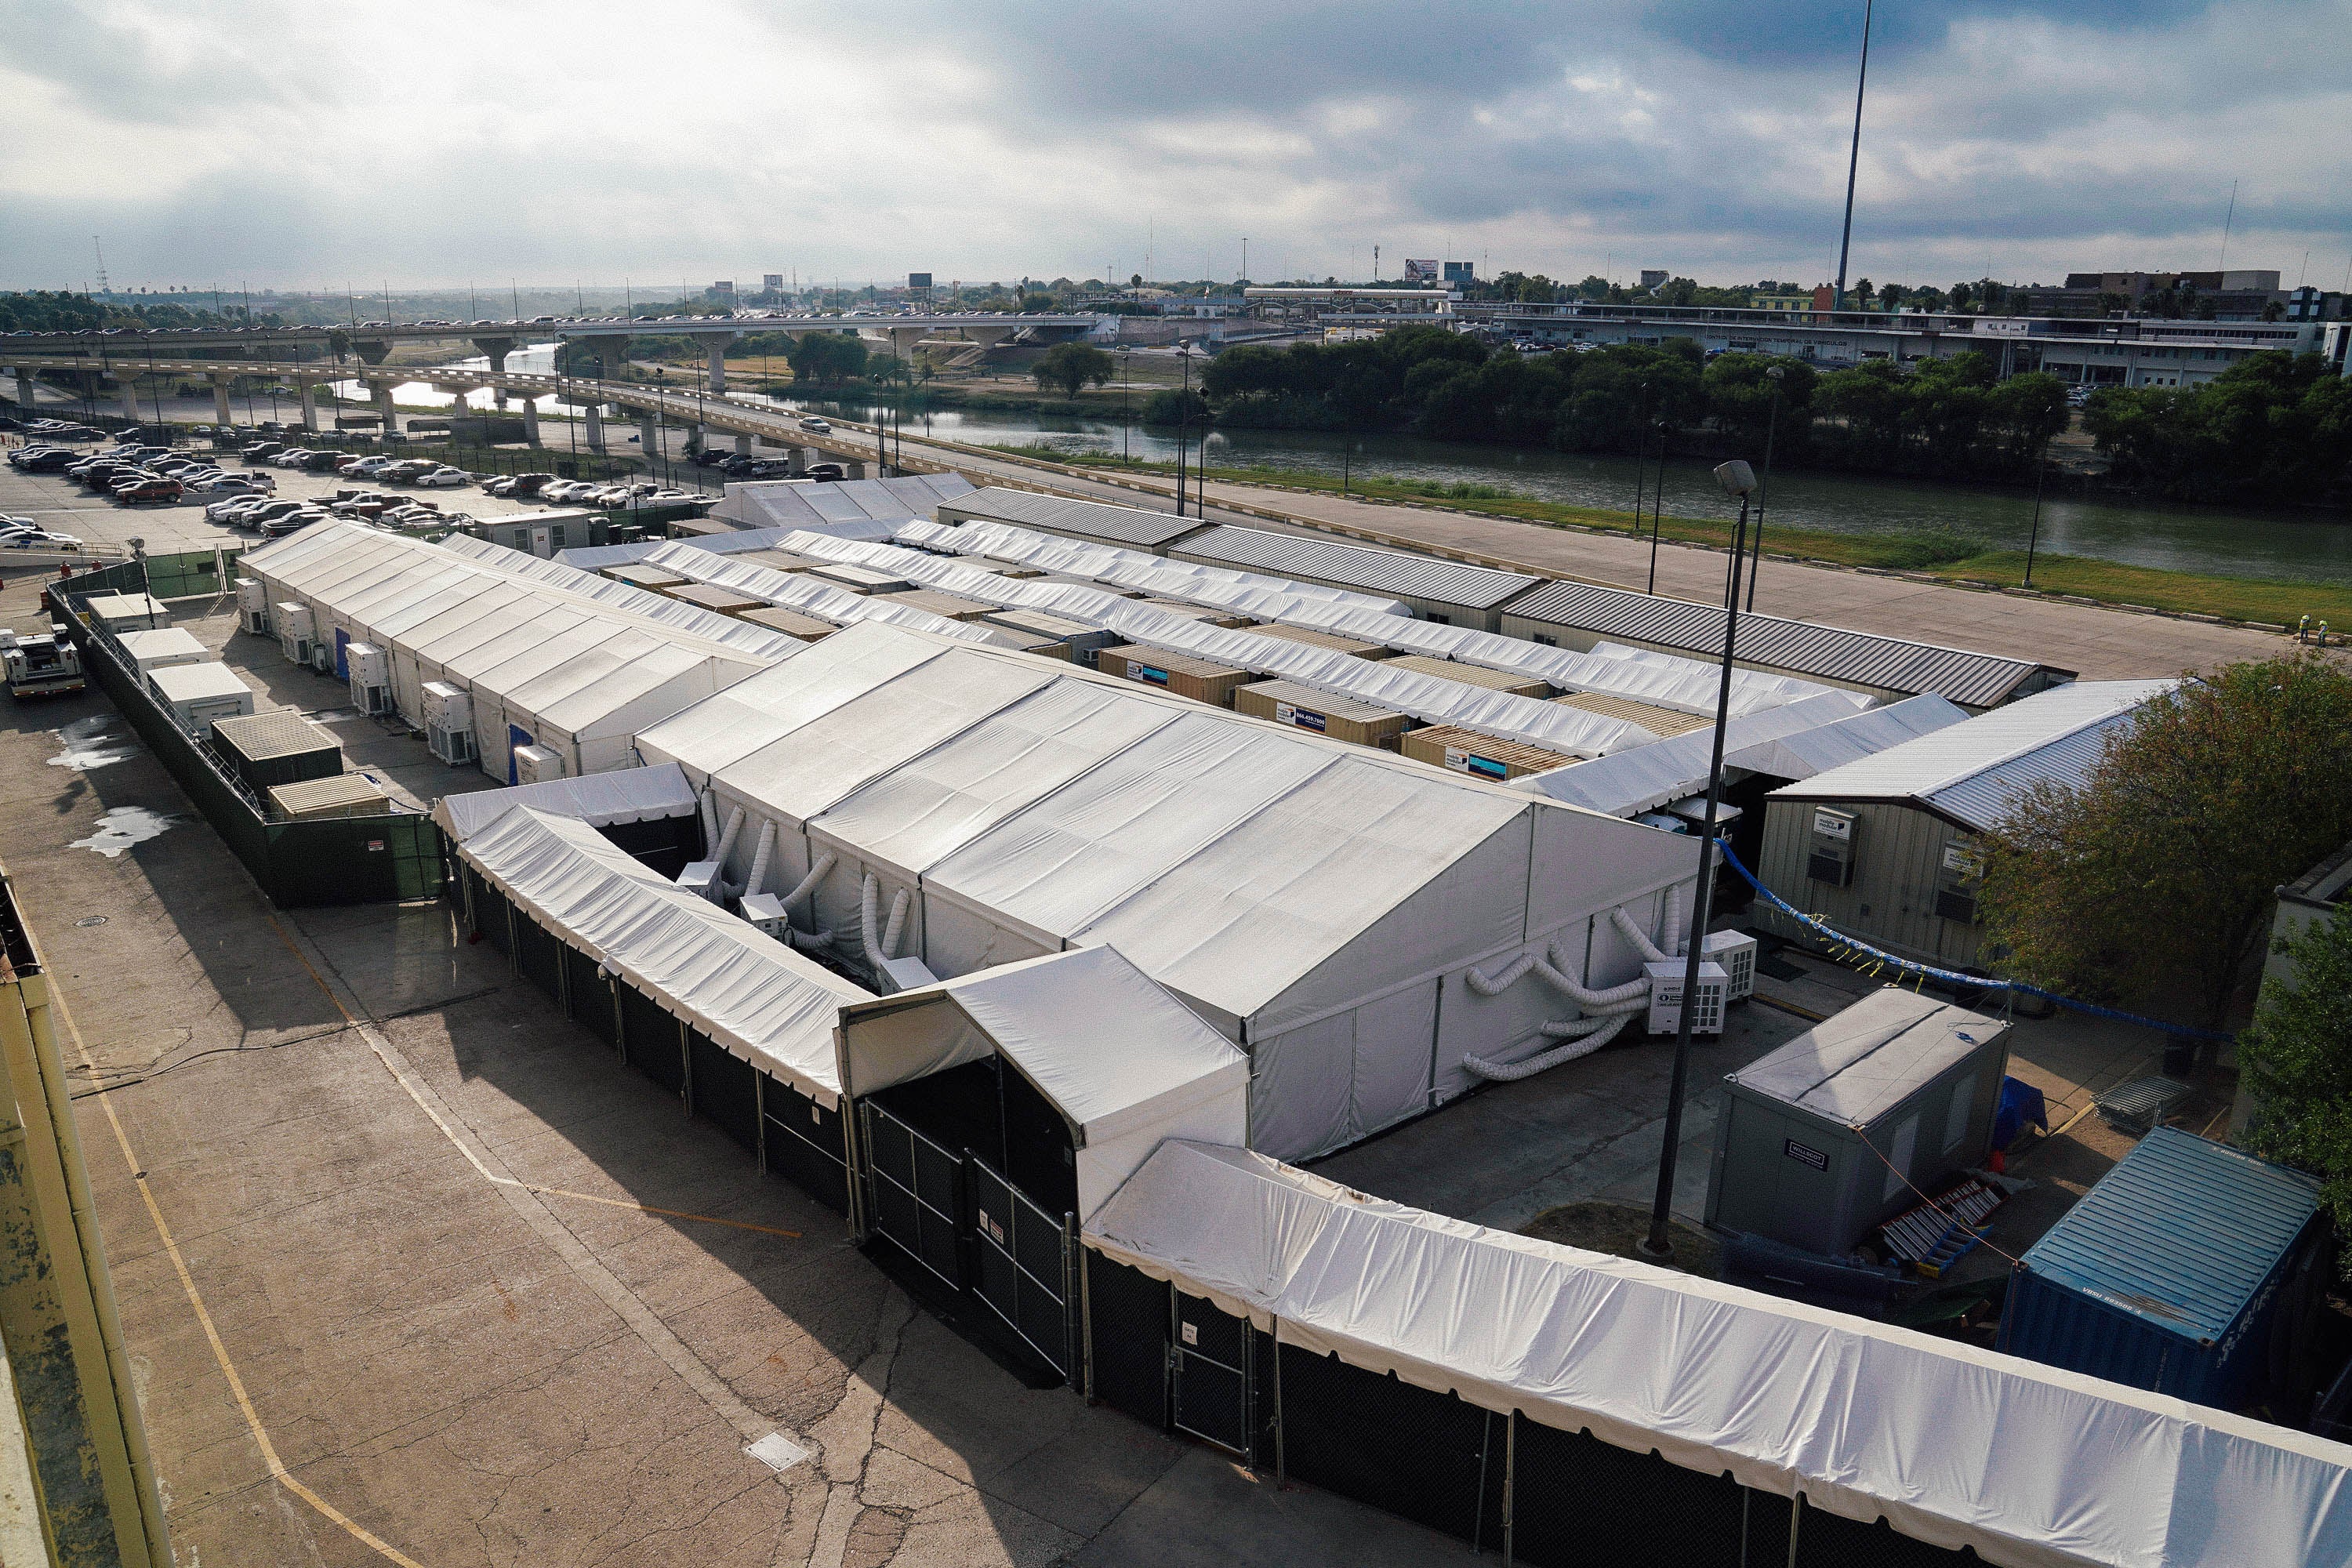 Soft-sided immigration court tents in Laredo, Texas, on Oct. 9.